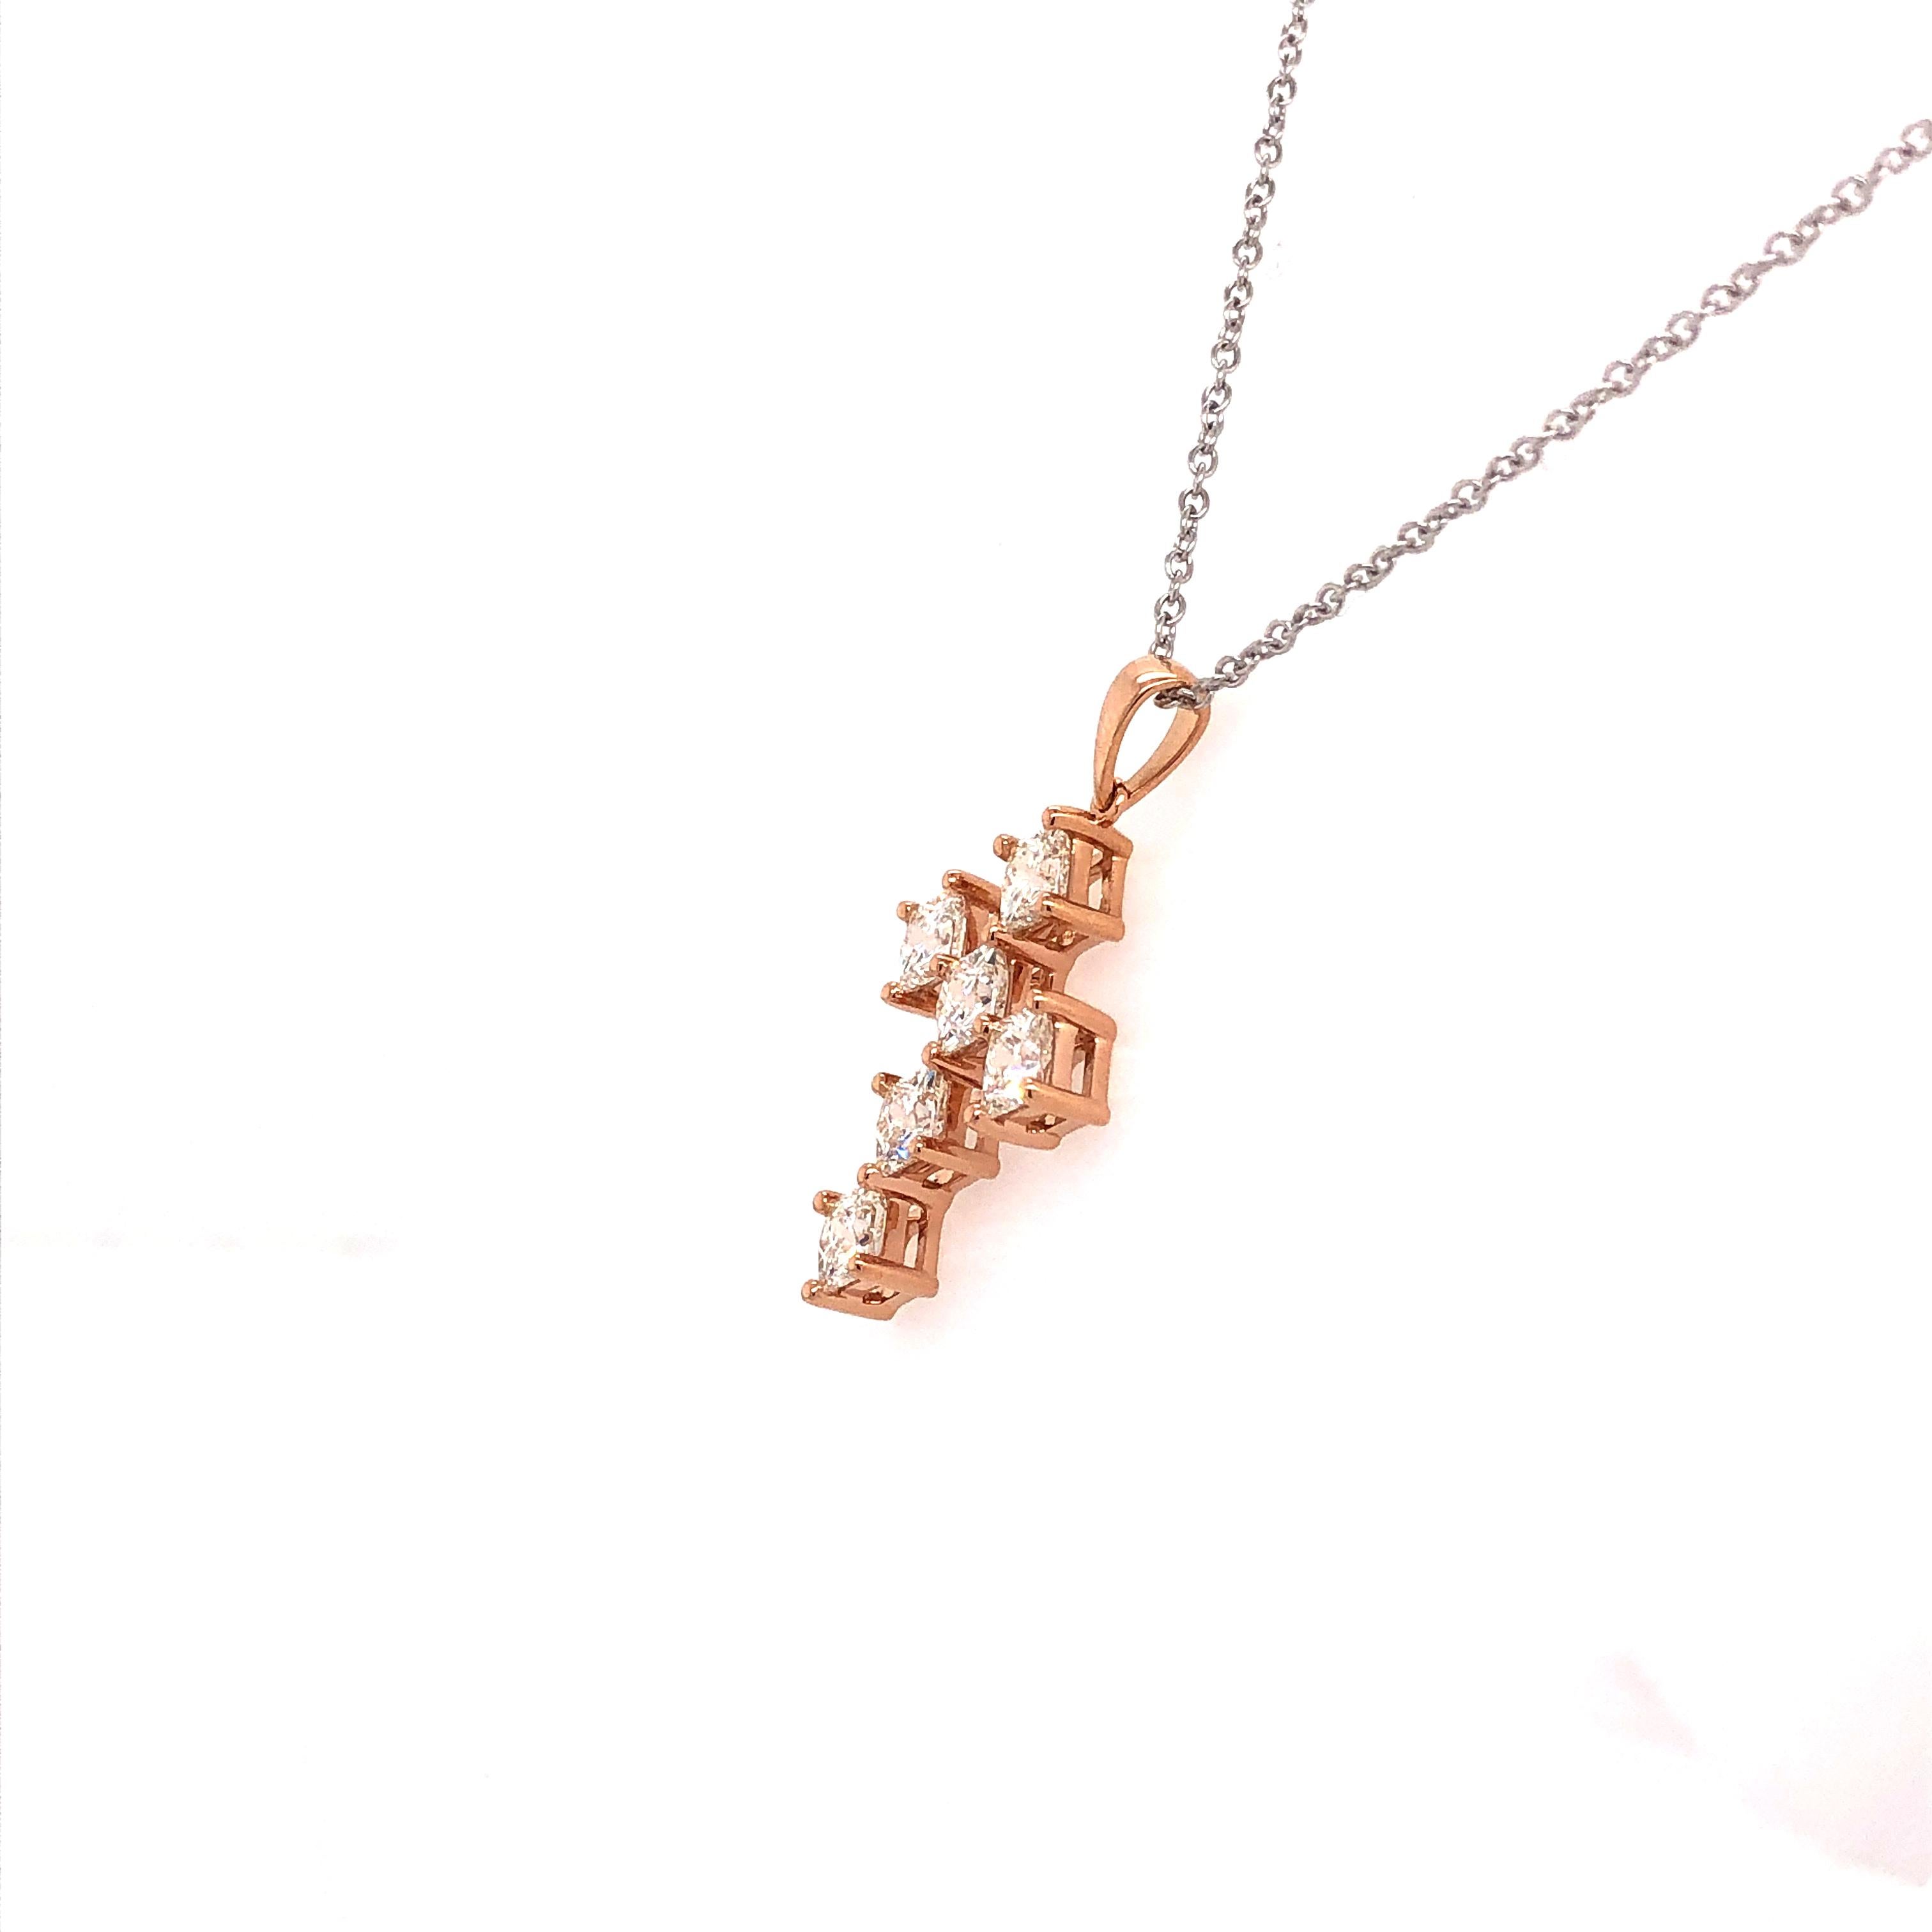 Six expertly calibrated My Girl diamonds are beautifully matched to achieve this design. The diamond cross pendant shown contains My Girl diamonds weighing 2.32 ct I-J Color and VVS Clarity and are set diagonally in 18K rose gold.

This design is